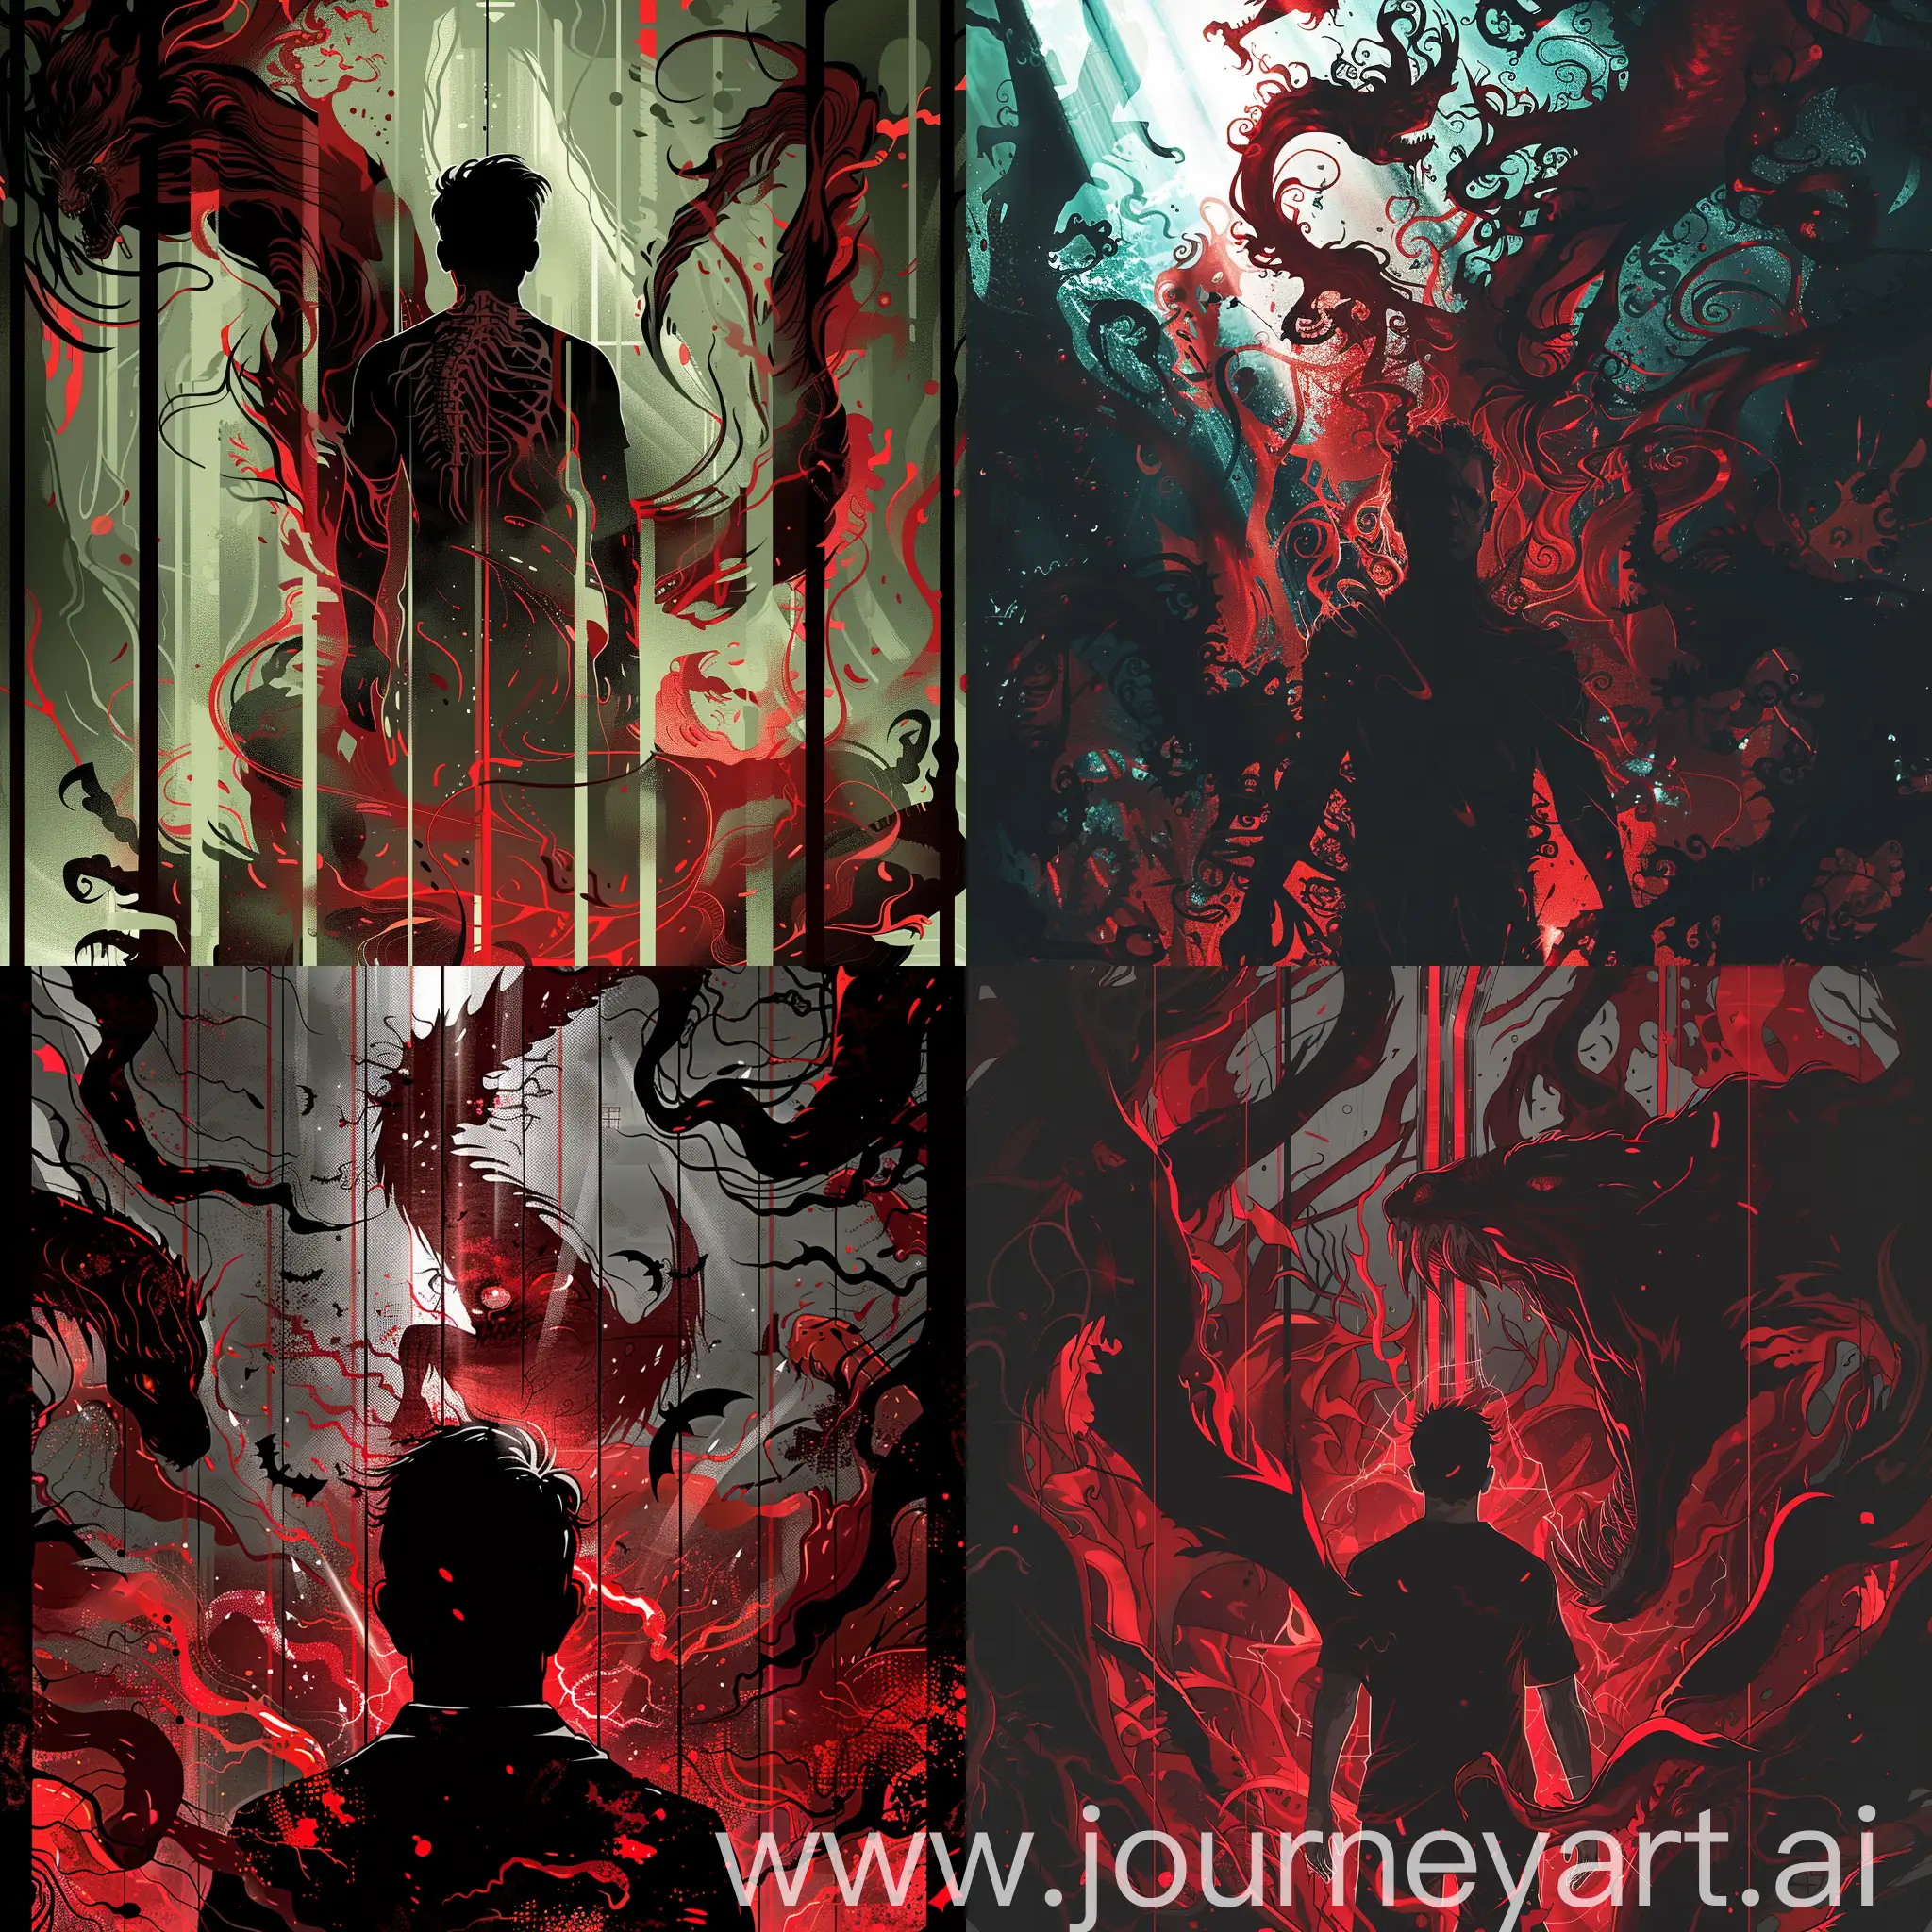 Illustrate a nightmarish scene depicting a man surrounded by a combination of red and black colors. Ensure that the man is backlit, giving him a mysterious silhouette, and add intricate details to enhance the sense of horror. Include a menacing manticore in the illustration, set against a glassy background. The aspect ratio of the illustration should be 71:128.